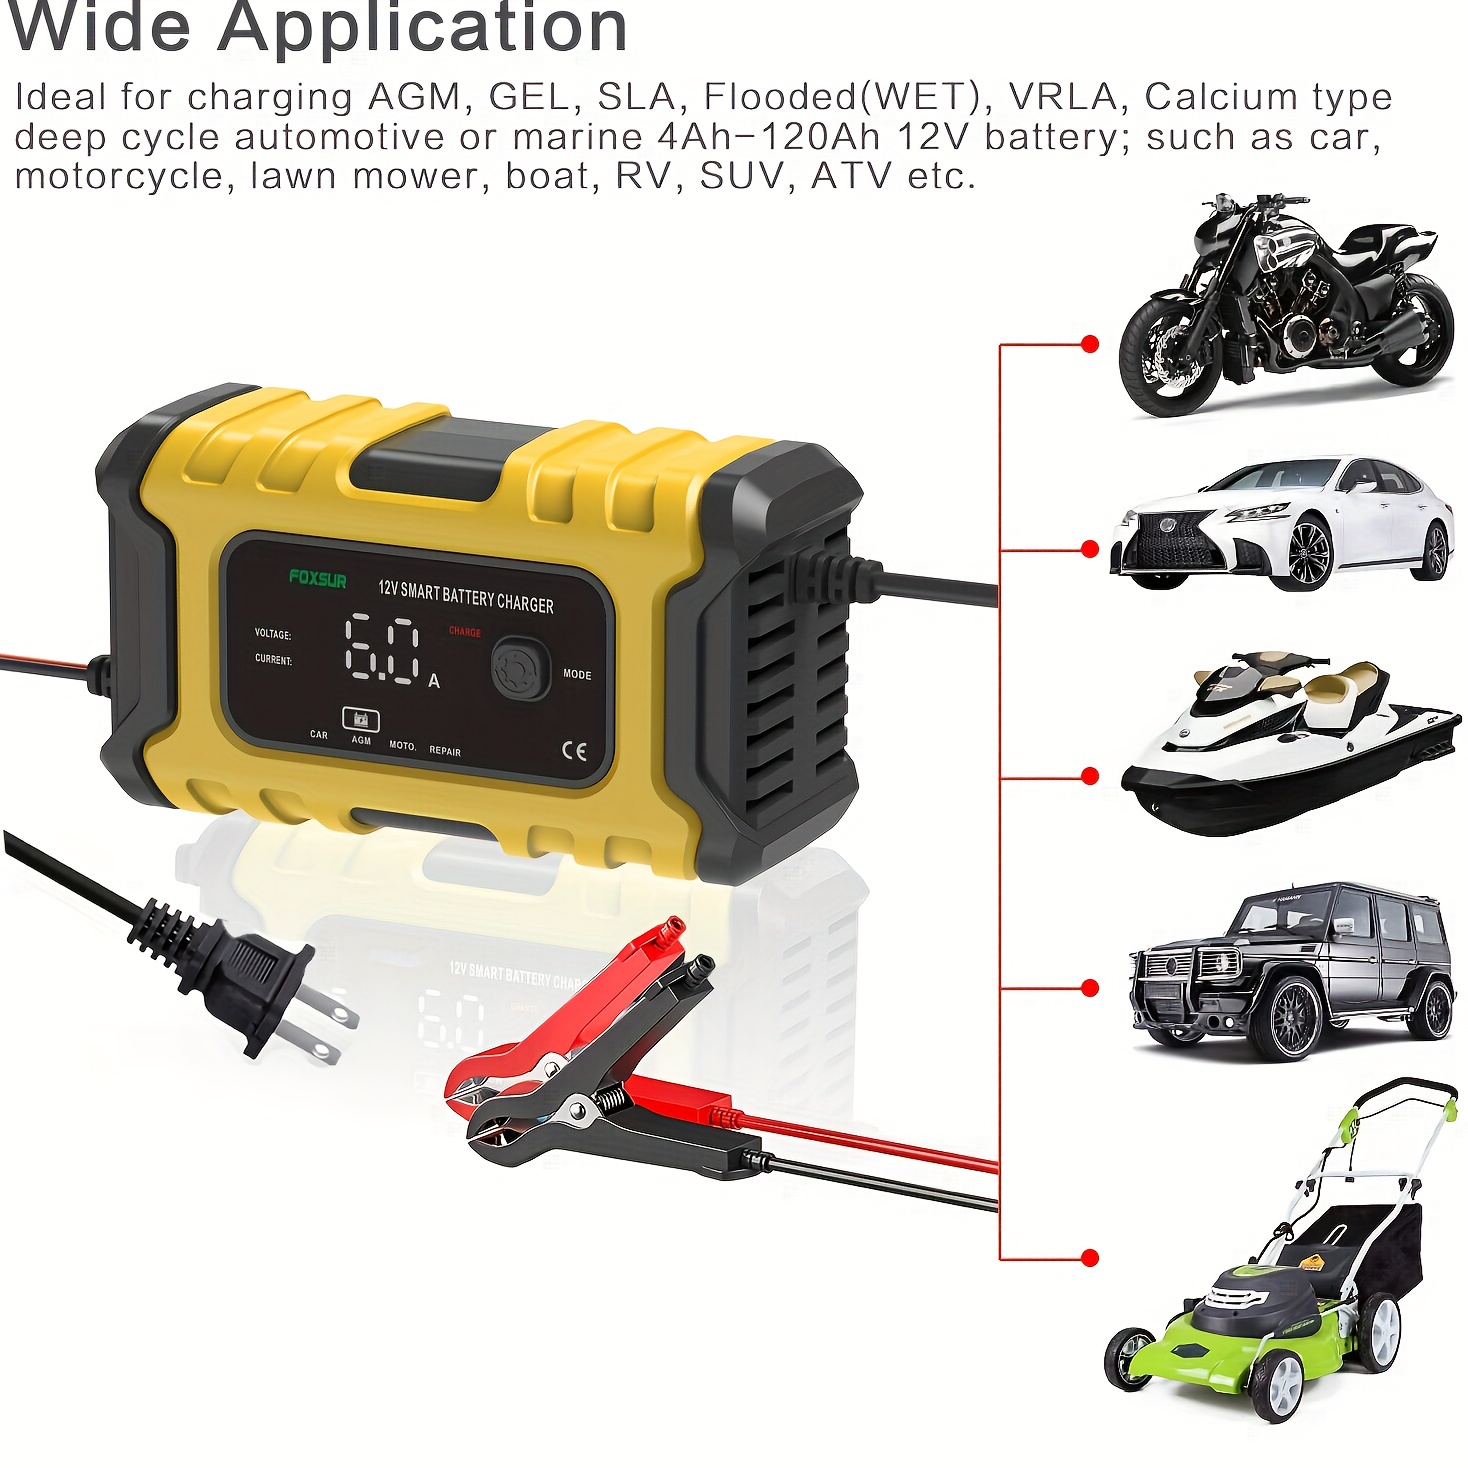  Portable Car Battery Charger Automotive, 6v 12v Battery Charger  Maintainer, Fast Car Charger, Smart Battery Chargers with LCD Display,  Trickle Charger for Car, Lawn Mower, Motorcycle, Boat : Automotive